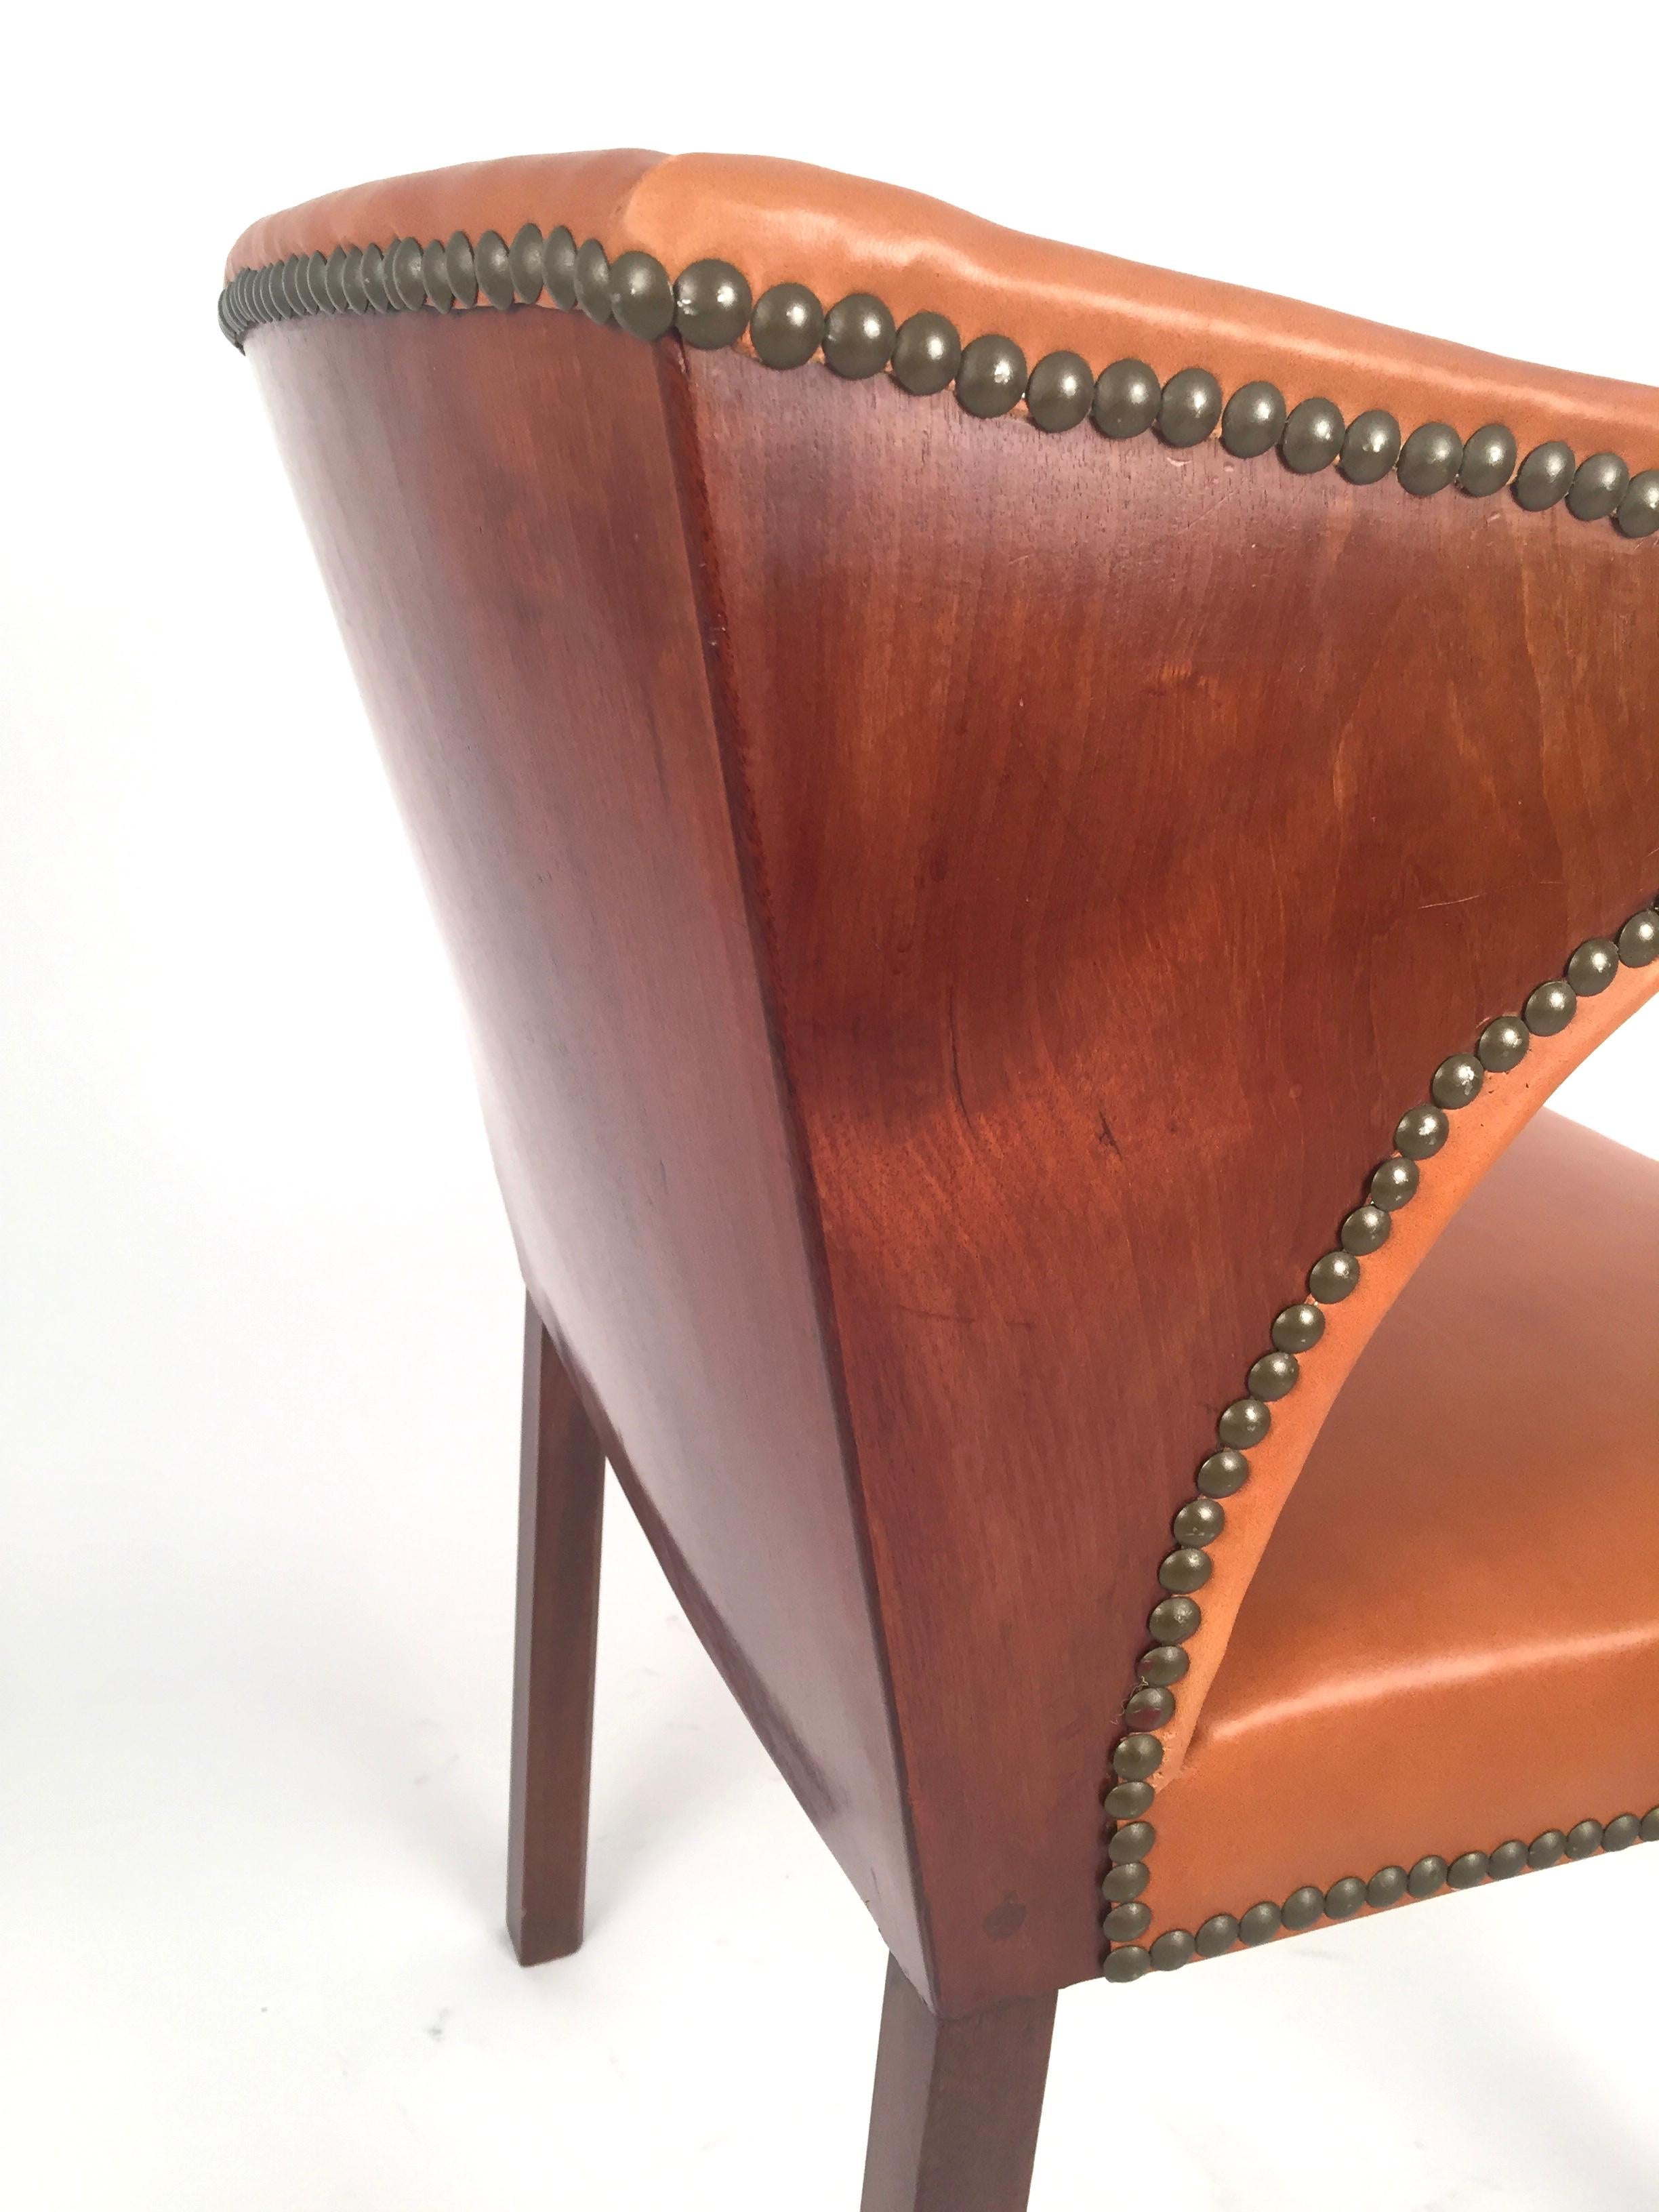 An armchair designed and edited by Frits Henningsen in 1933. Cuban mahogany frame ;professionally reupholstered in brown leather. Brass nails. Excellent condition. Shipping worldwide.Free professional packing and shipping is provided.